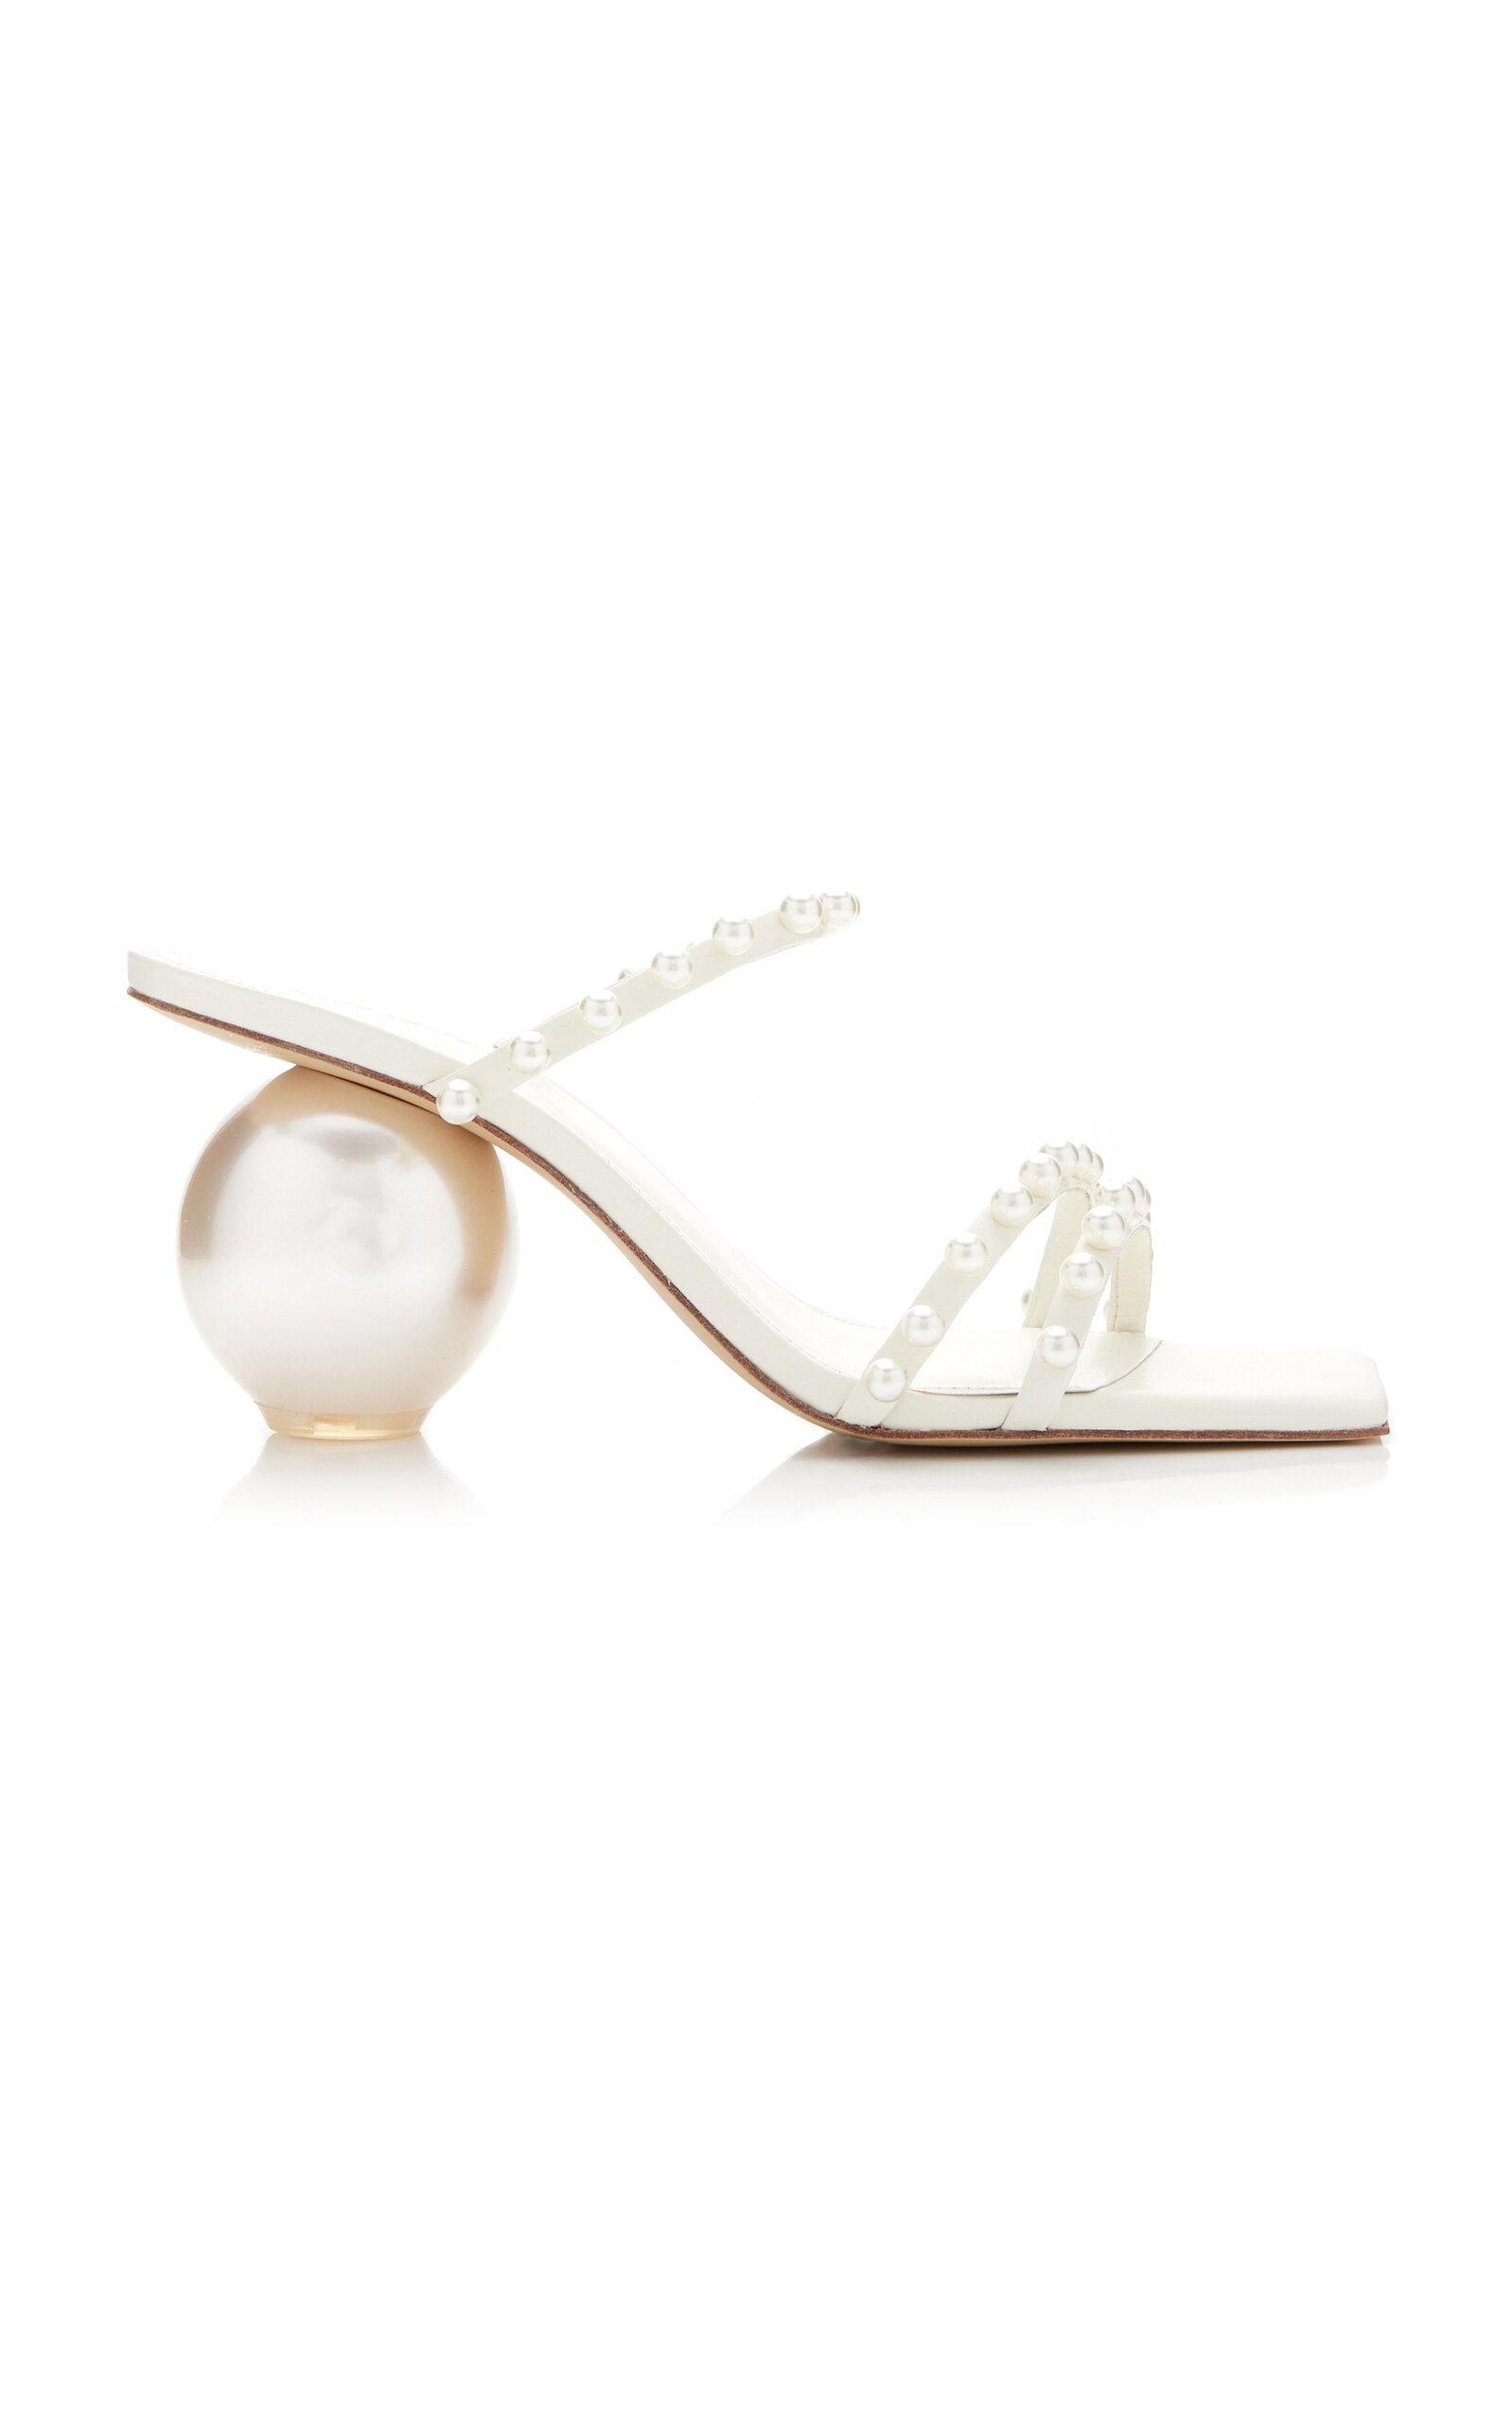 Cult Gaia Ilona Pearl-embellished Leather Sandals in White | Lyst